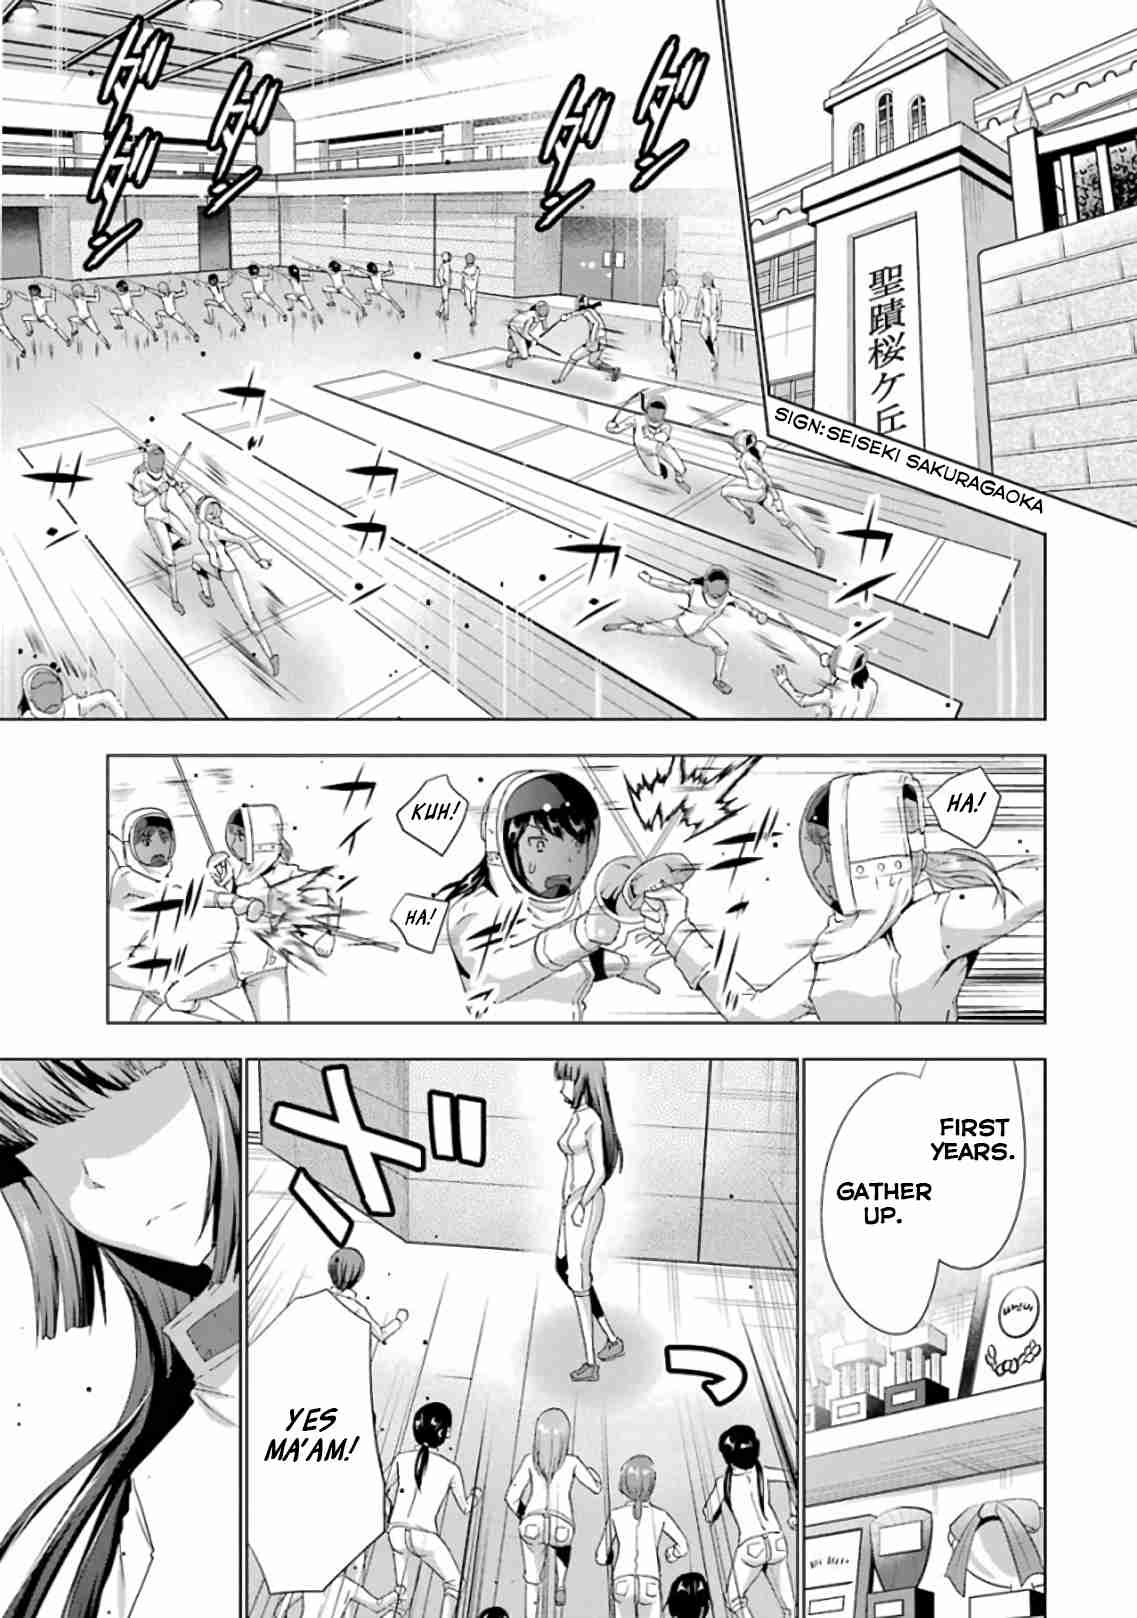 Duel! Vol. 1 Ch. 6 Face to face